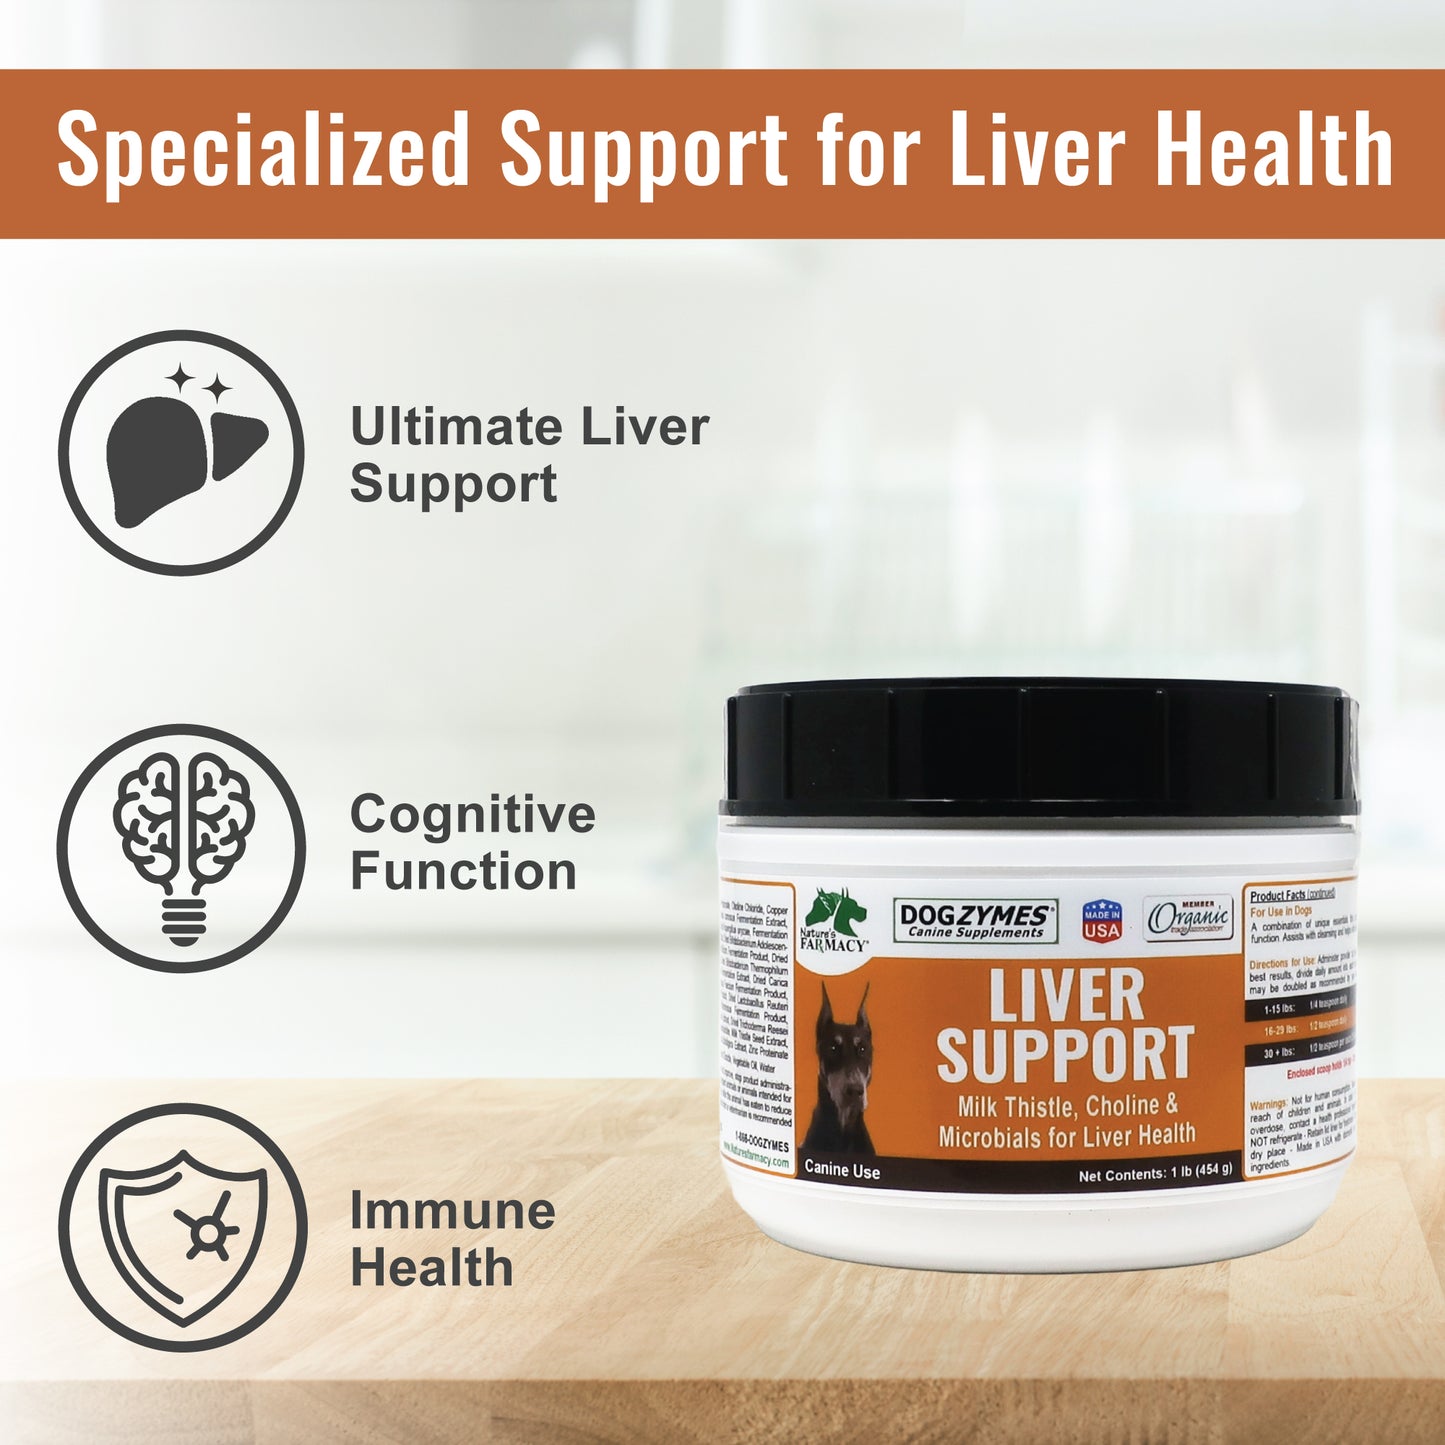 Dogzymes Liver Support